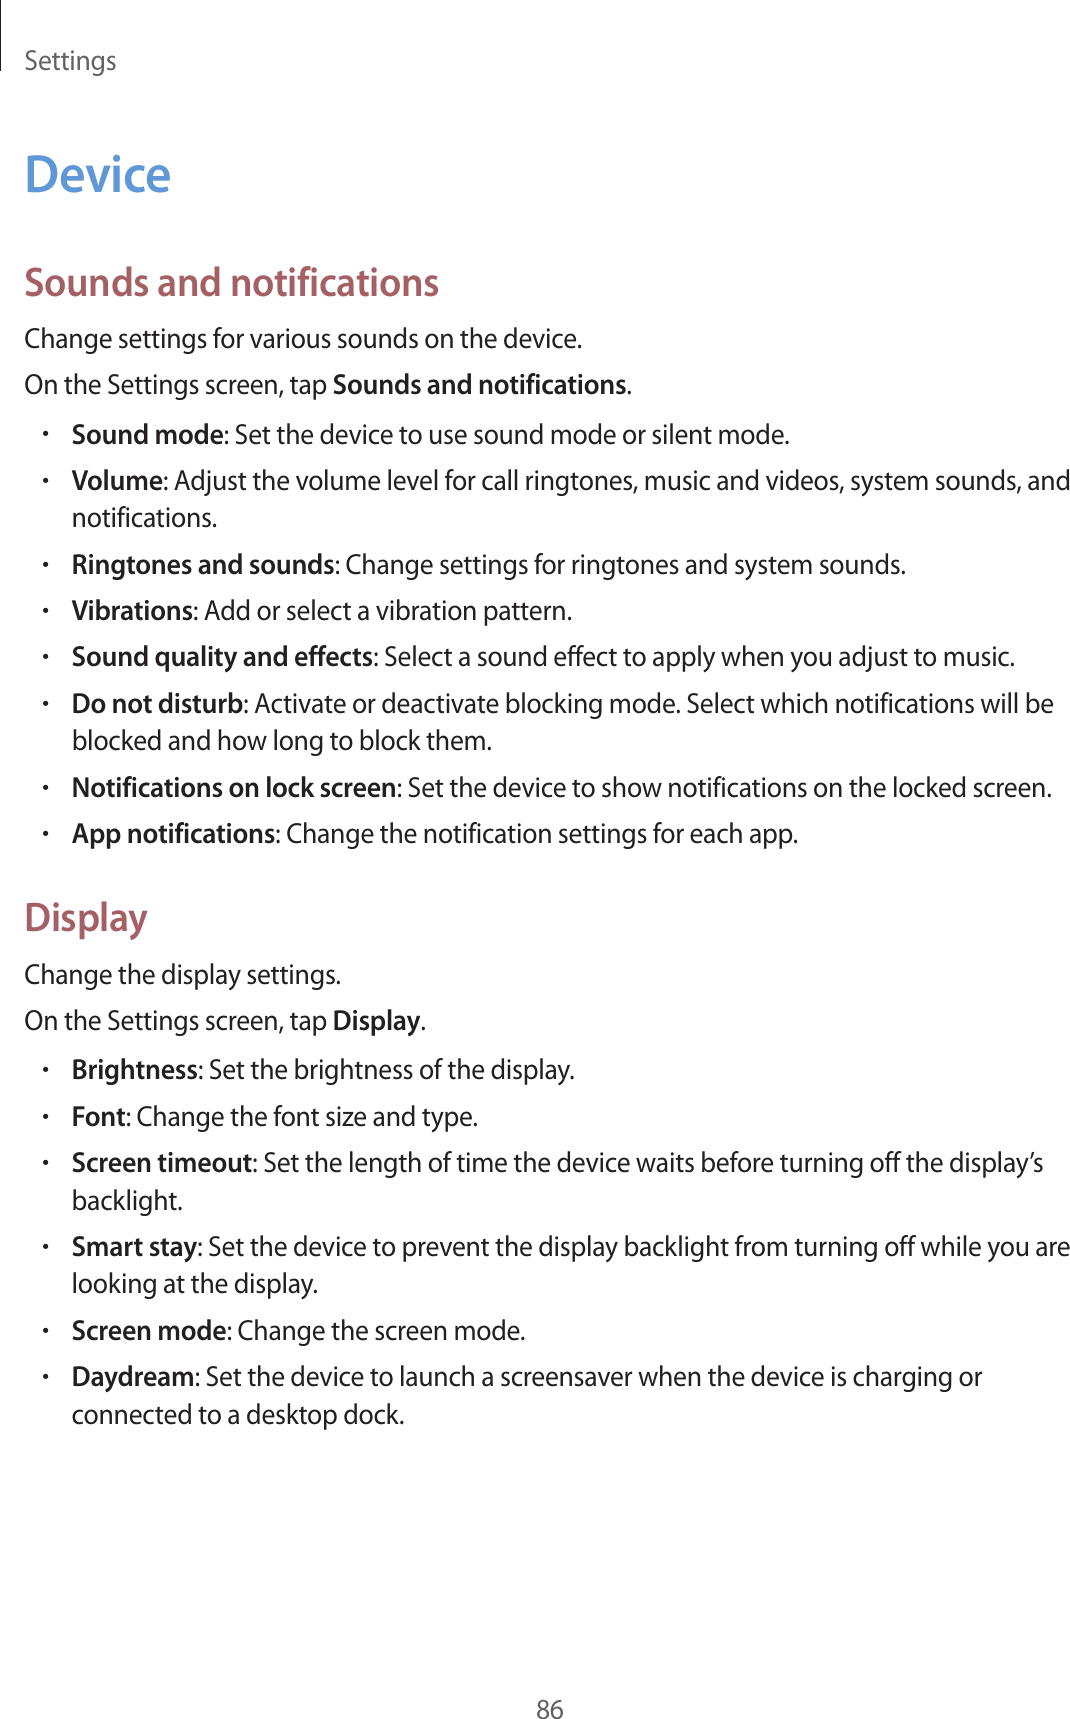 Settings86DeviceSounds and notificationsChange settings for various sounds on the device.On the Settings screen, tap Sounds and notifications.•Sound mode: Set the device to use sound mode or silent mode.•Volume: Adjust the volume level for call ringtones, music and videos, system sounds, andnotifications.•Ringtones and sounds: Change settings for ringtones and system sounds.•Vibrations: Add or select a vibration pattern.•Sound quality and effects: Select a sound effect to apply when you adjust to music.•Do not disturb: Activate or deactivate blocking mode. Select which notifications will beblocked and how long to block them.•Notifications on lock screen: Set the device to show notifications on the locked screen.•App notifications: Change the notification settings for each app.DisplayChange the display settings.On the Settings screen, tap Display.•Brightness: Set the brightness of the display.•Font: Change the font size and type.•Screen timeout: Set the length of time the device waits before turning off the display’sbacklight.•Smart stay: Set the device to prevent the display backlight from turning off while you arelooking at the display.•Screen mode: Change the screen mode.•Daydream: Set the device to launch a screensaver when the device is charging orconnected to a desktop dock.